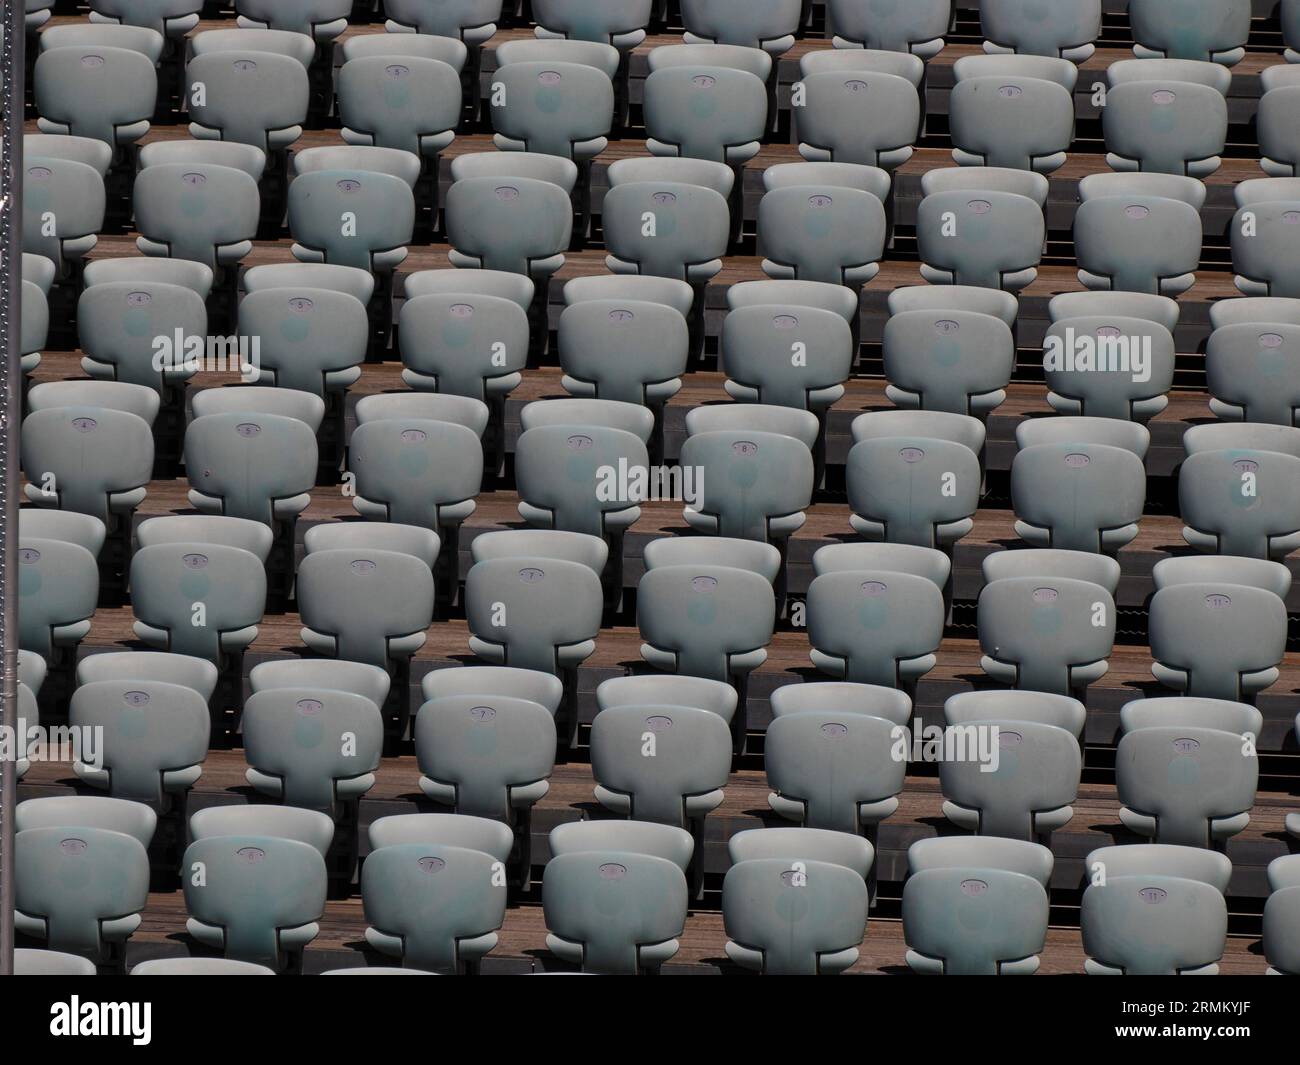 Rows of numbered empty plastic seats at an open-air amphitheater many audience open theater seats Stock Photo